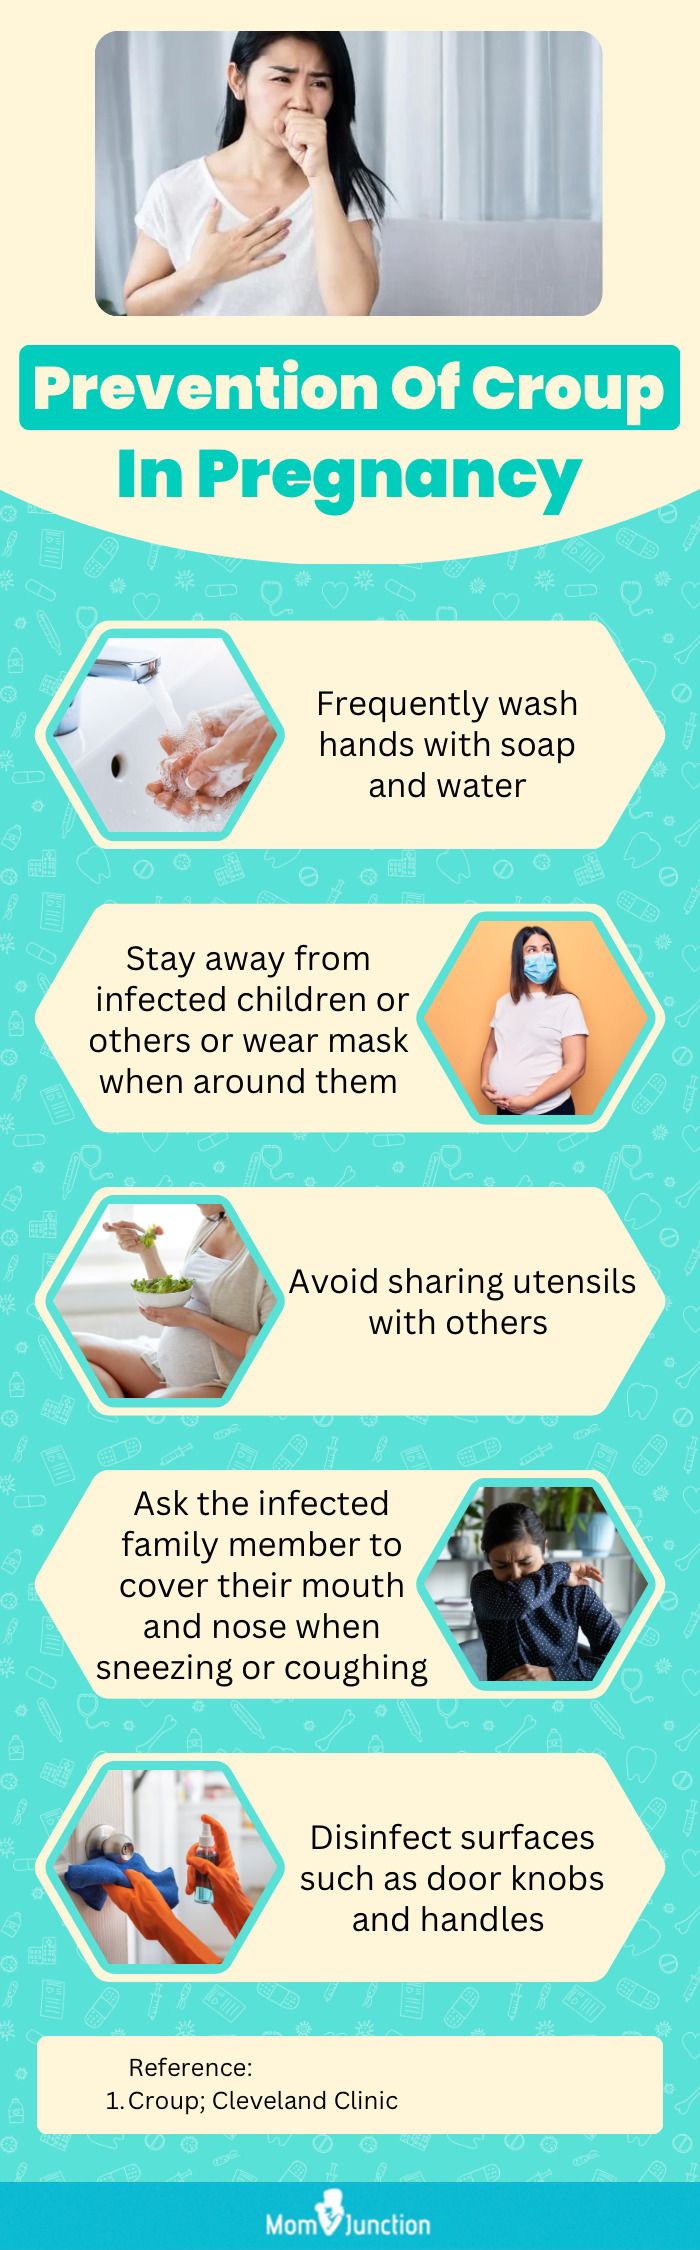 tips to prevent croup in pregnancy (infographic)